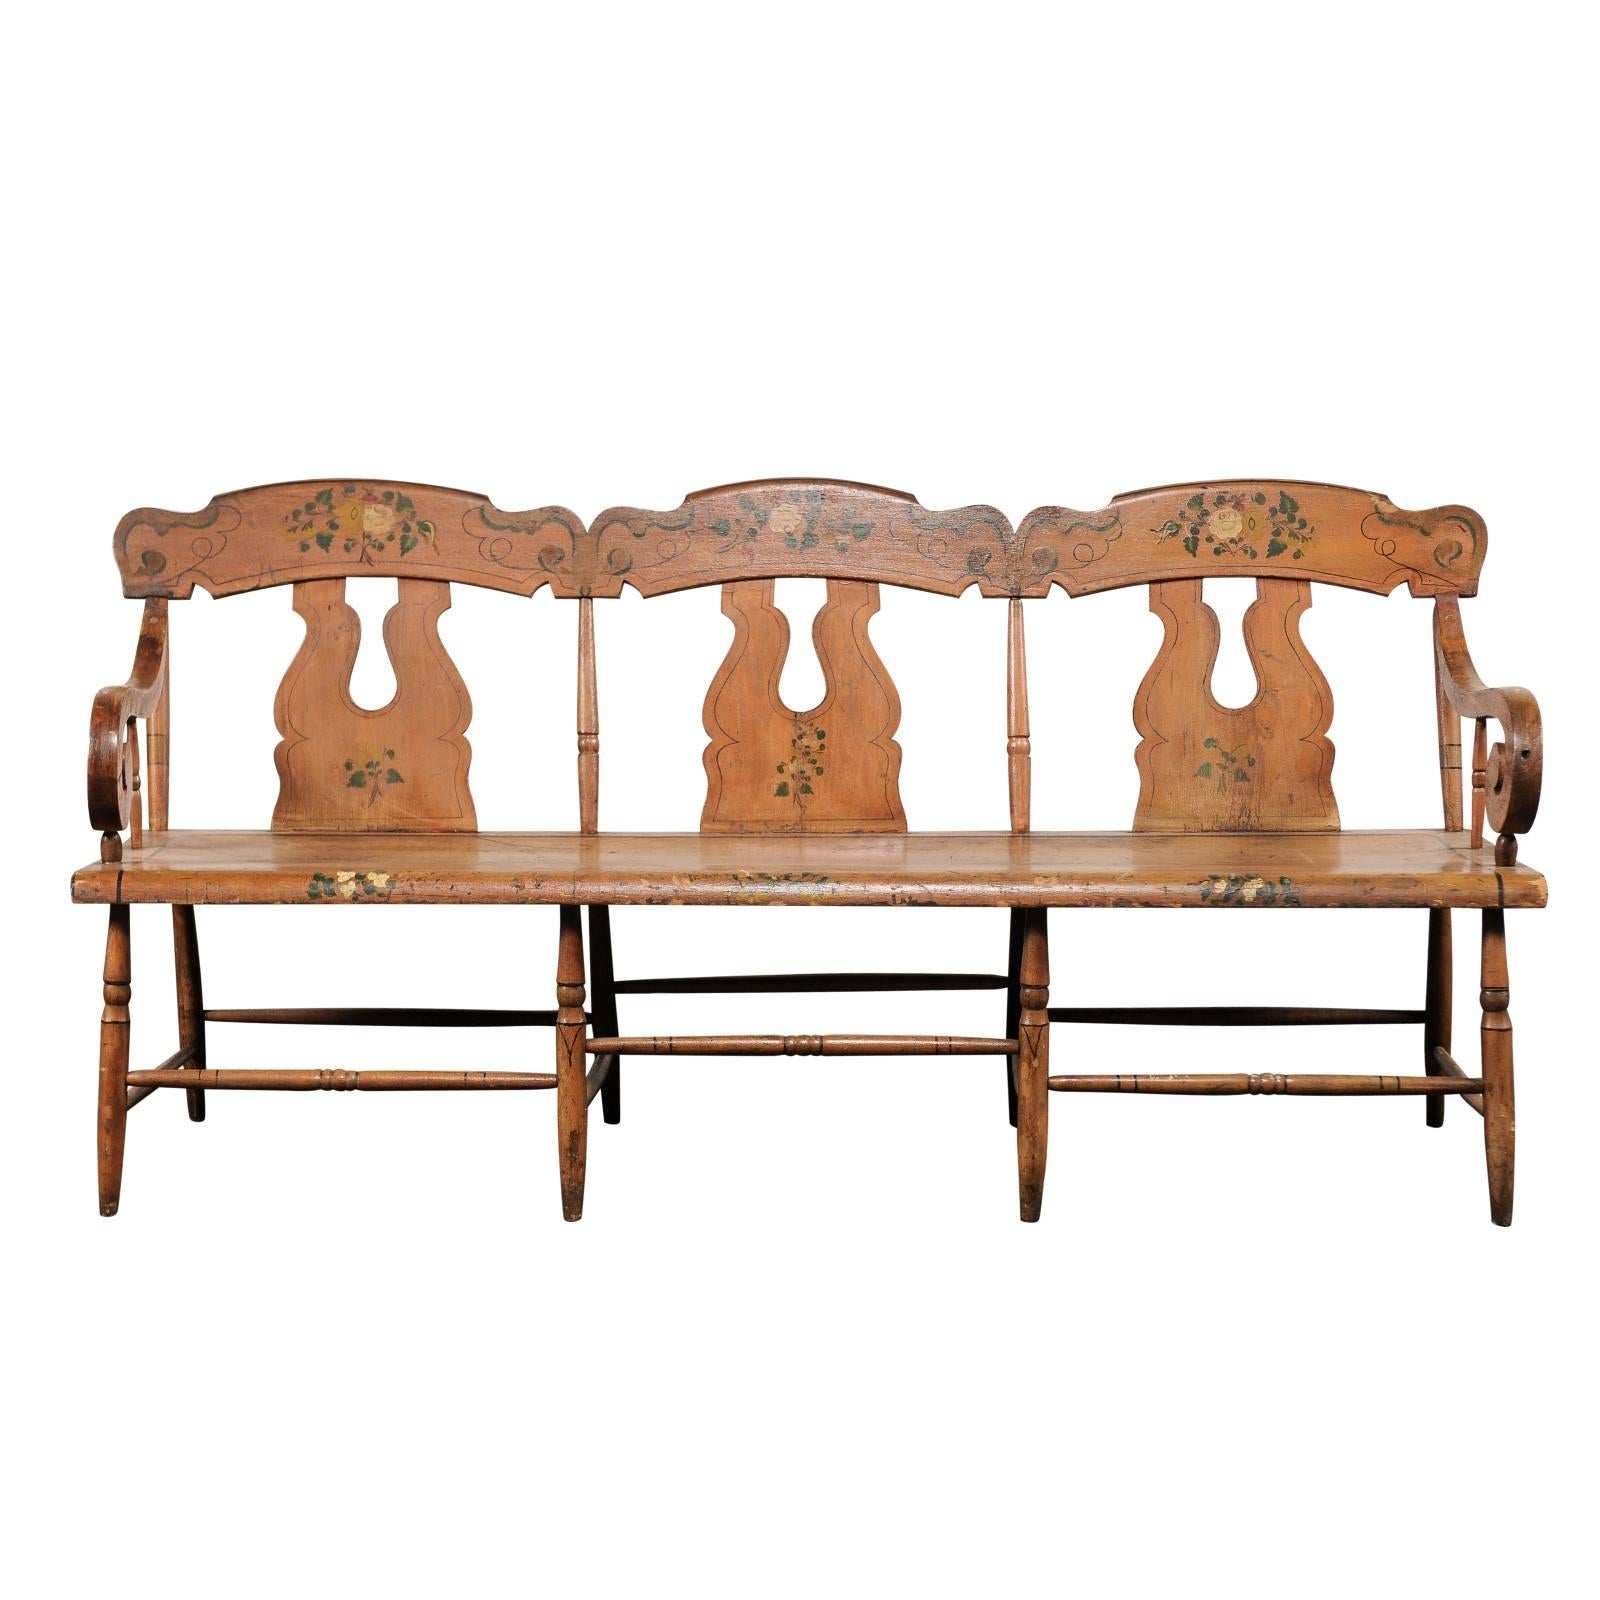 19th Century American Painted Bench For Sale